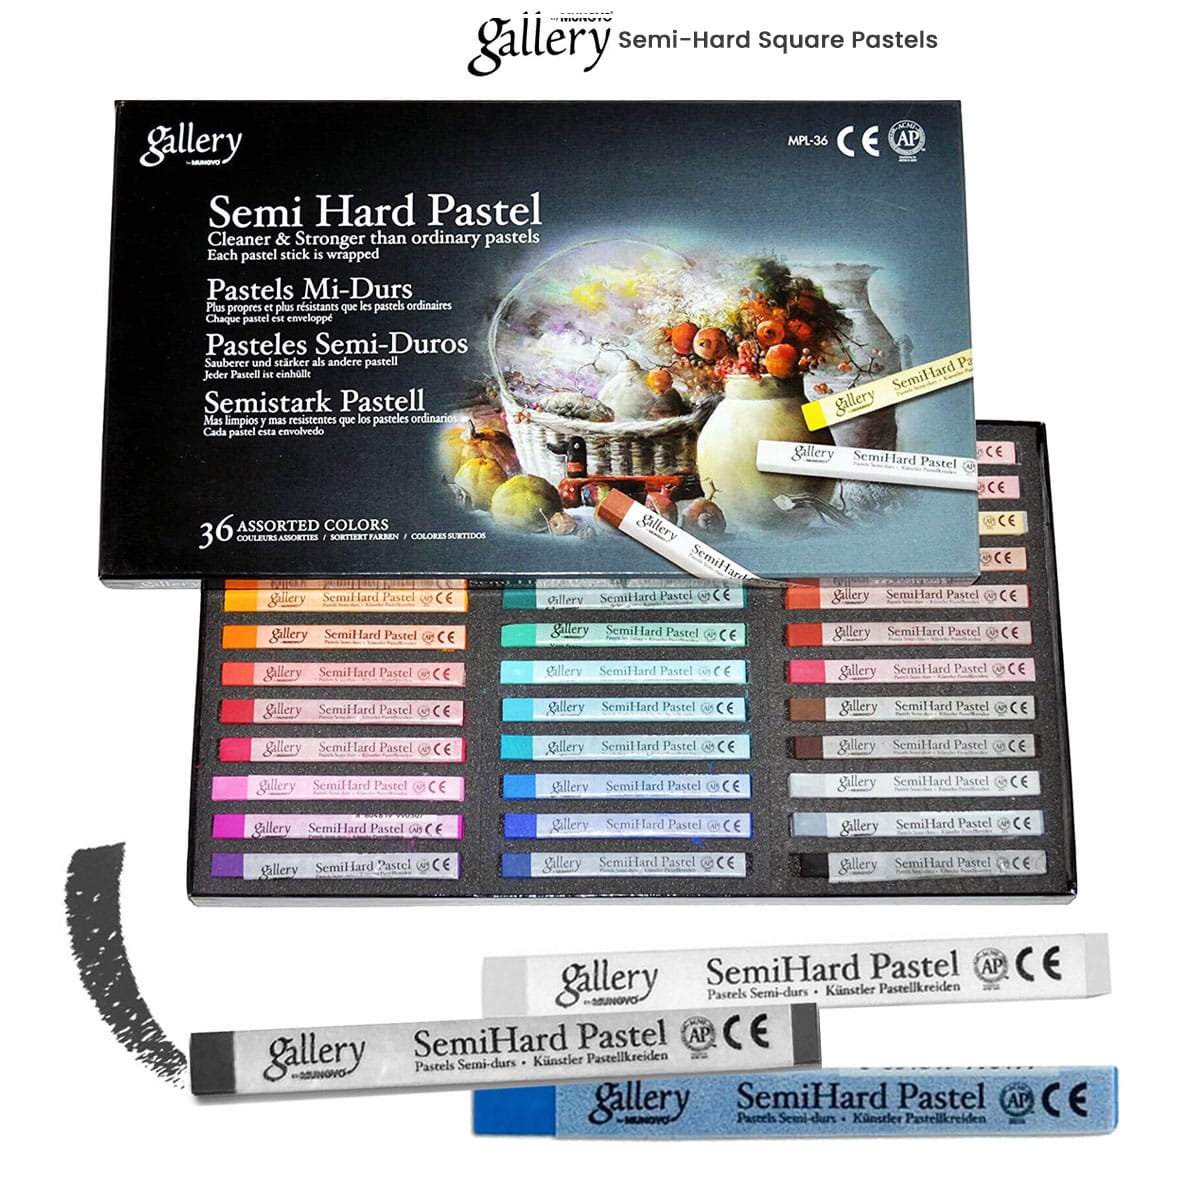 Art Spectrum Colourfix Smooth Pastel Papers